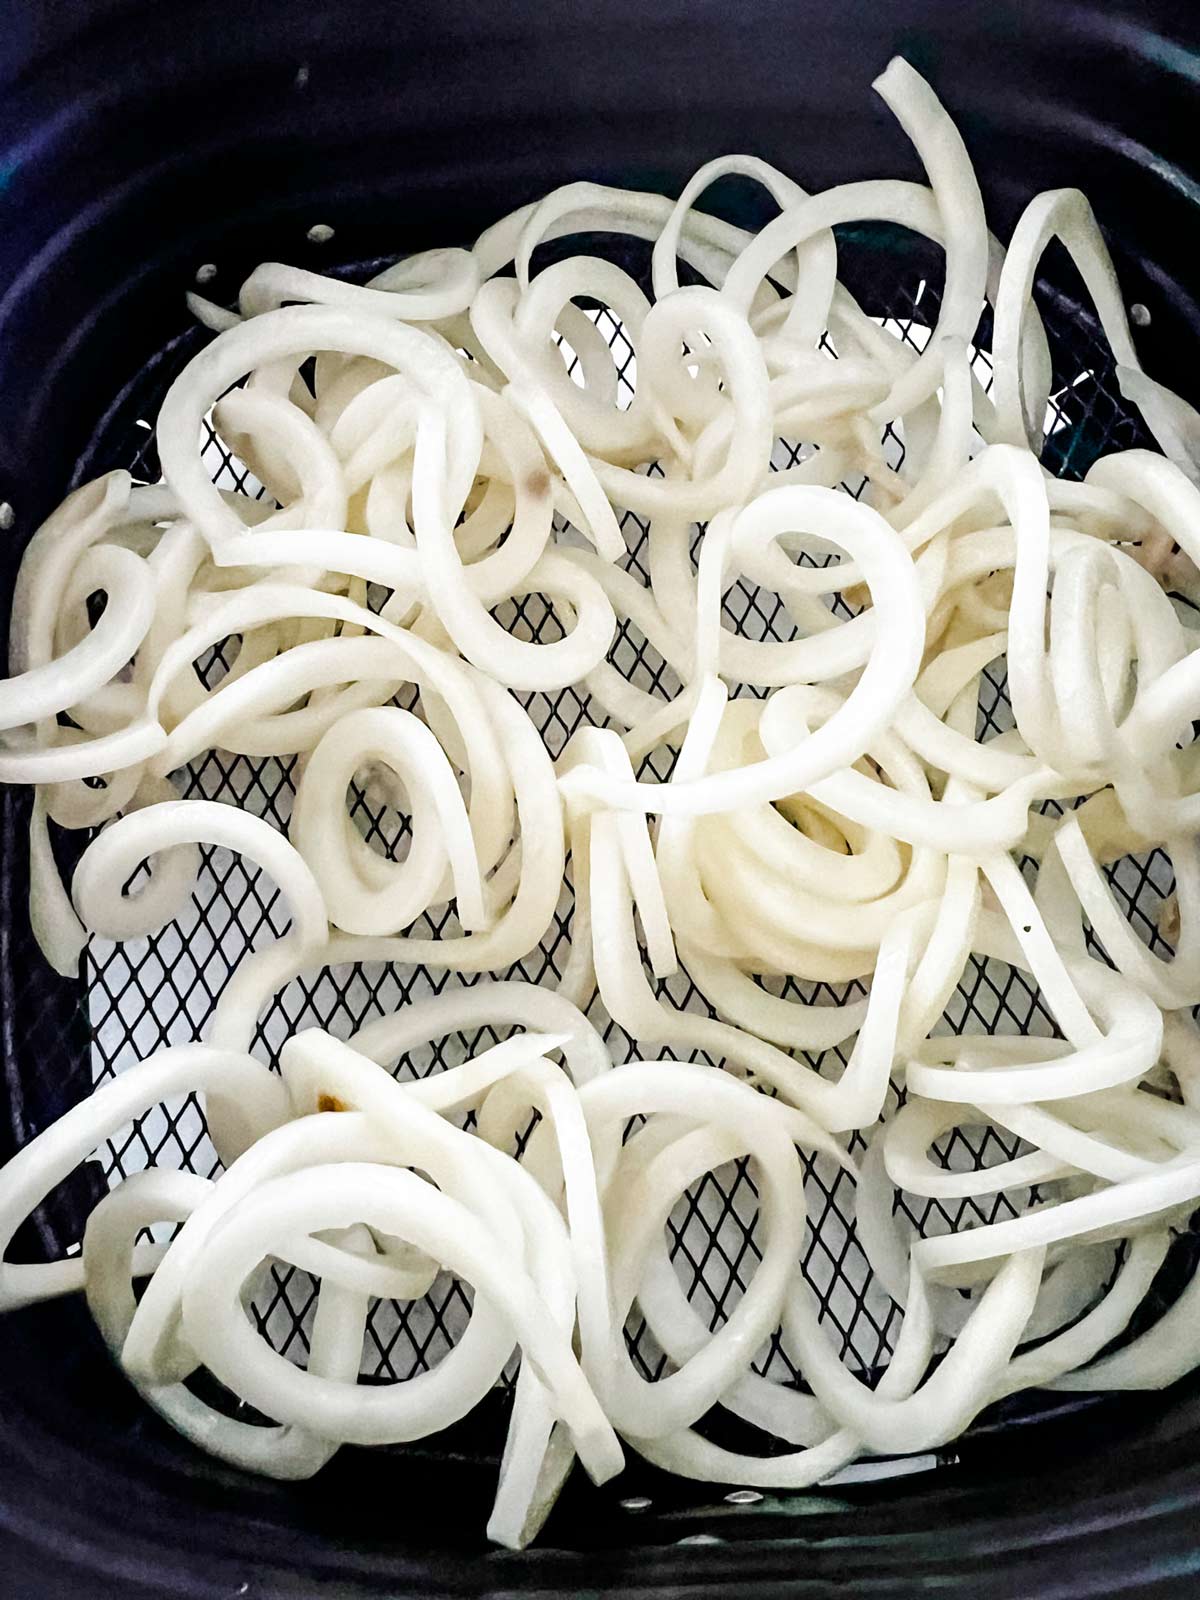 Curly fries in an air fryer basket ready to cook.